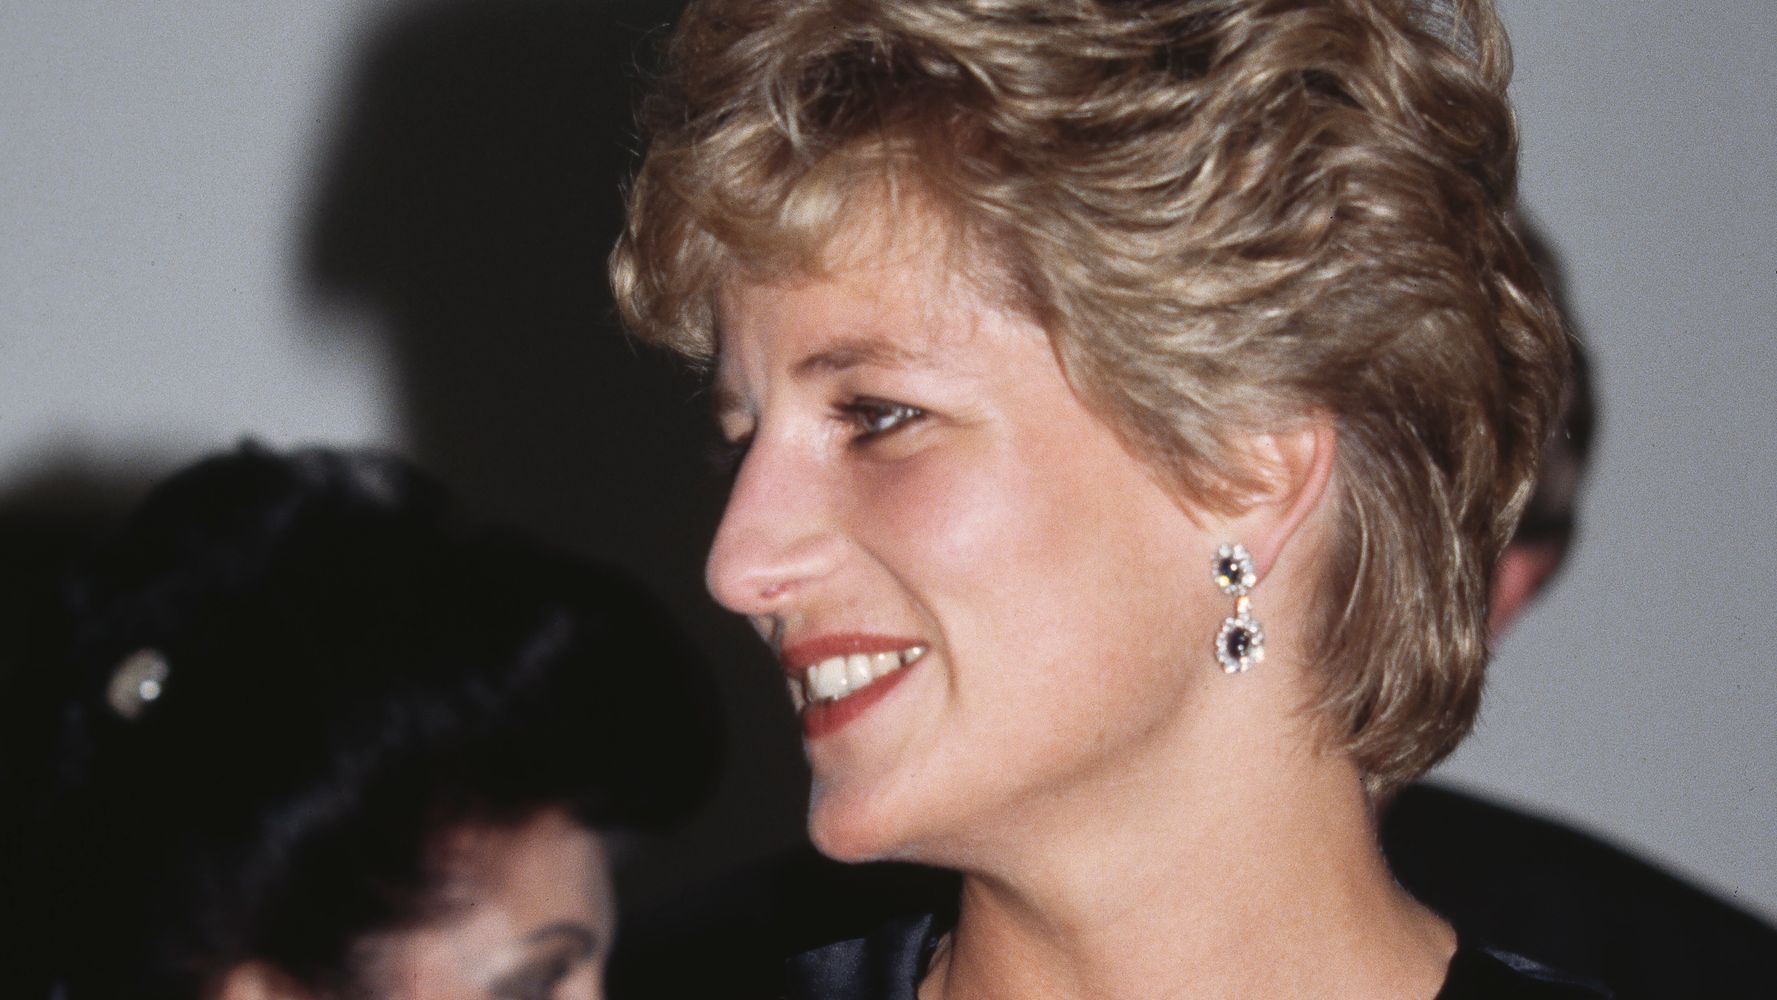 Ex-BBC Boss Quits Gallery Job Amid Fallout From Princess Diana Interview